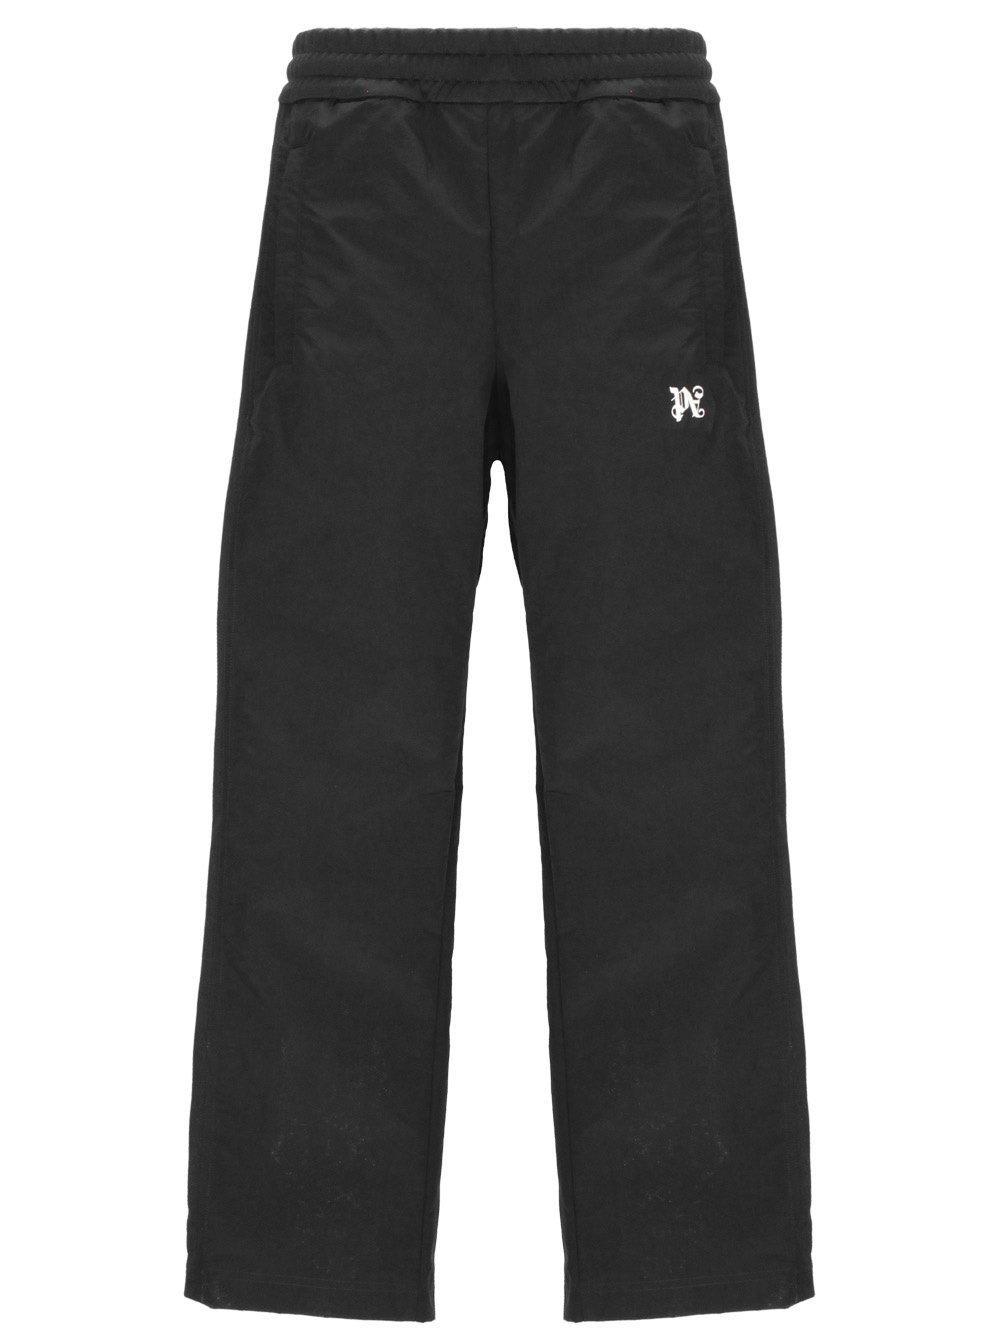 Palm Angels Black Embroidered Trousers